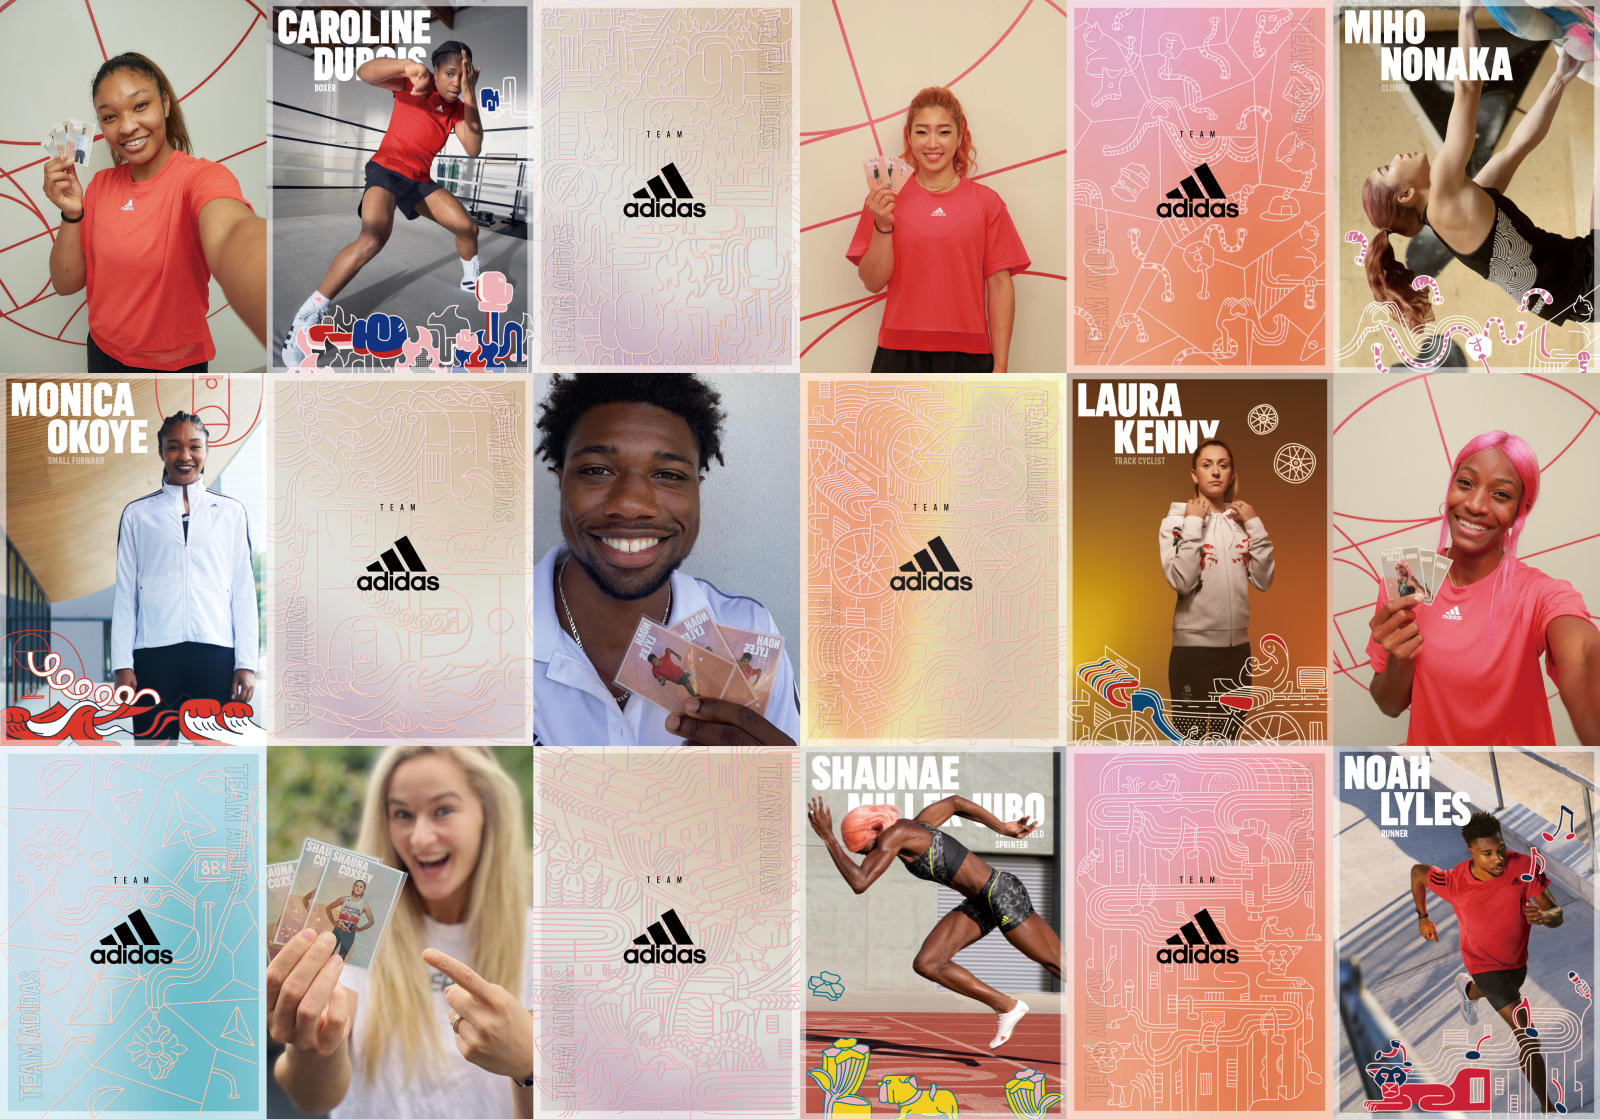 Adidas' project to support athletes who participated in the Tokyo Olympics and Paralympics 2020